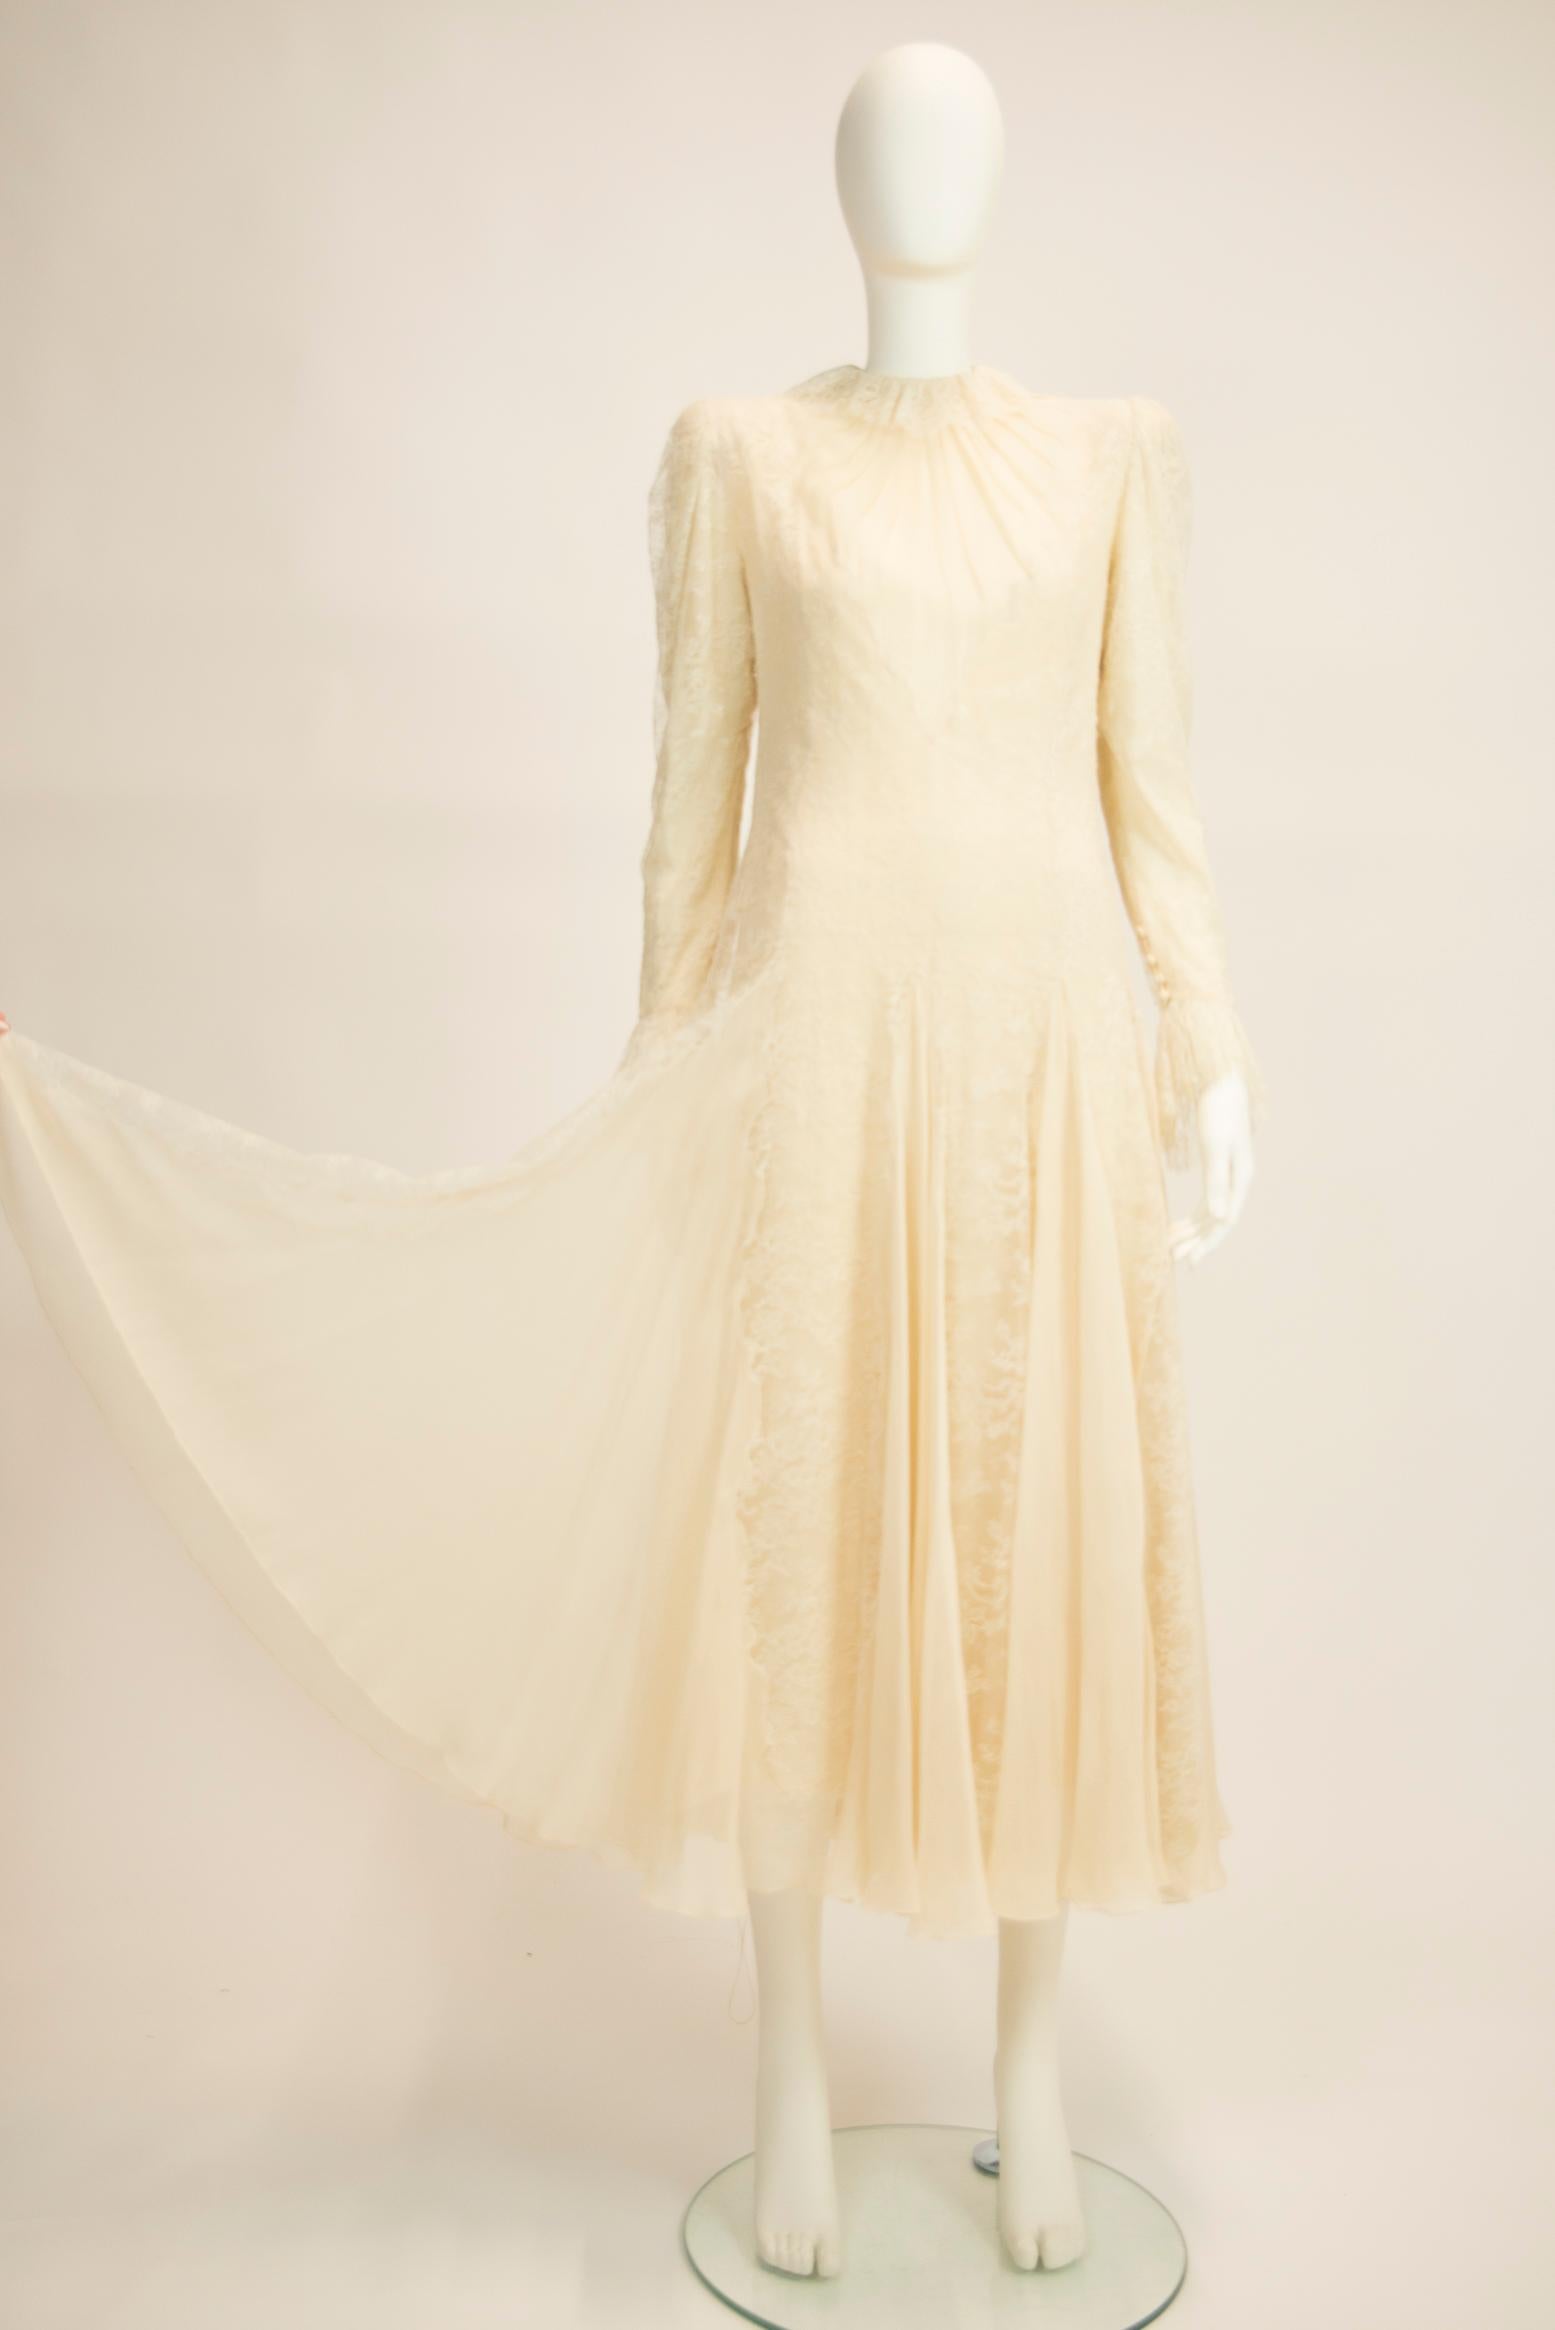 Exquisite Jean Louis Scherrer Couture Silk Chiffon & Lace-Trimmed Dress In Good Condition For Sale In Geneva, CH